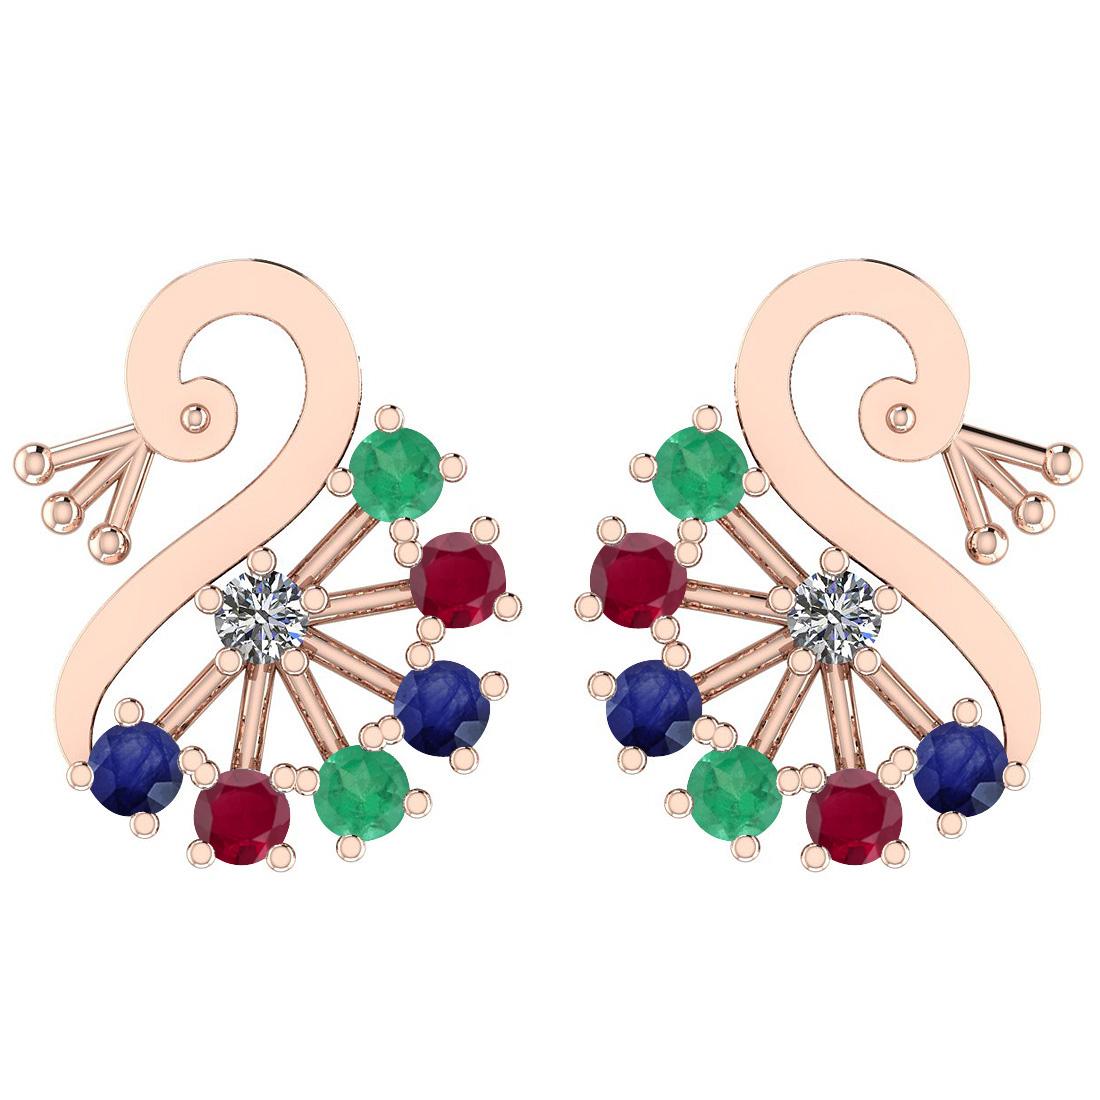 Certified 0.95 Ctw Emerald, Ruby, Sapphire And Diamond I1/I2 14K Rose Gold Stud Earrings